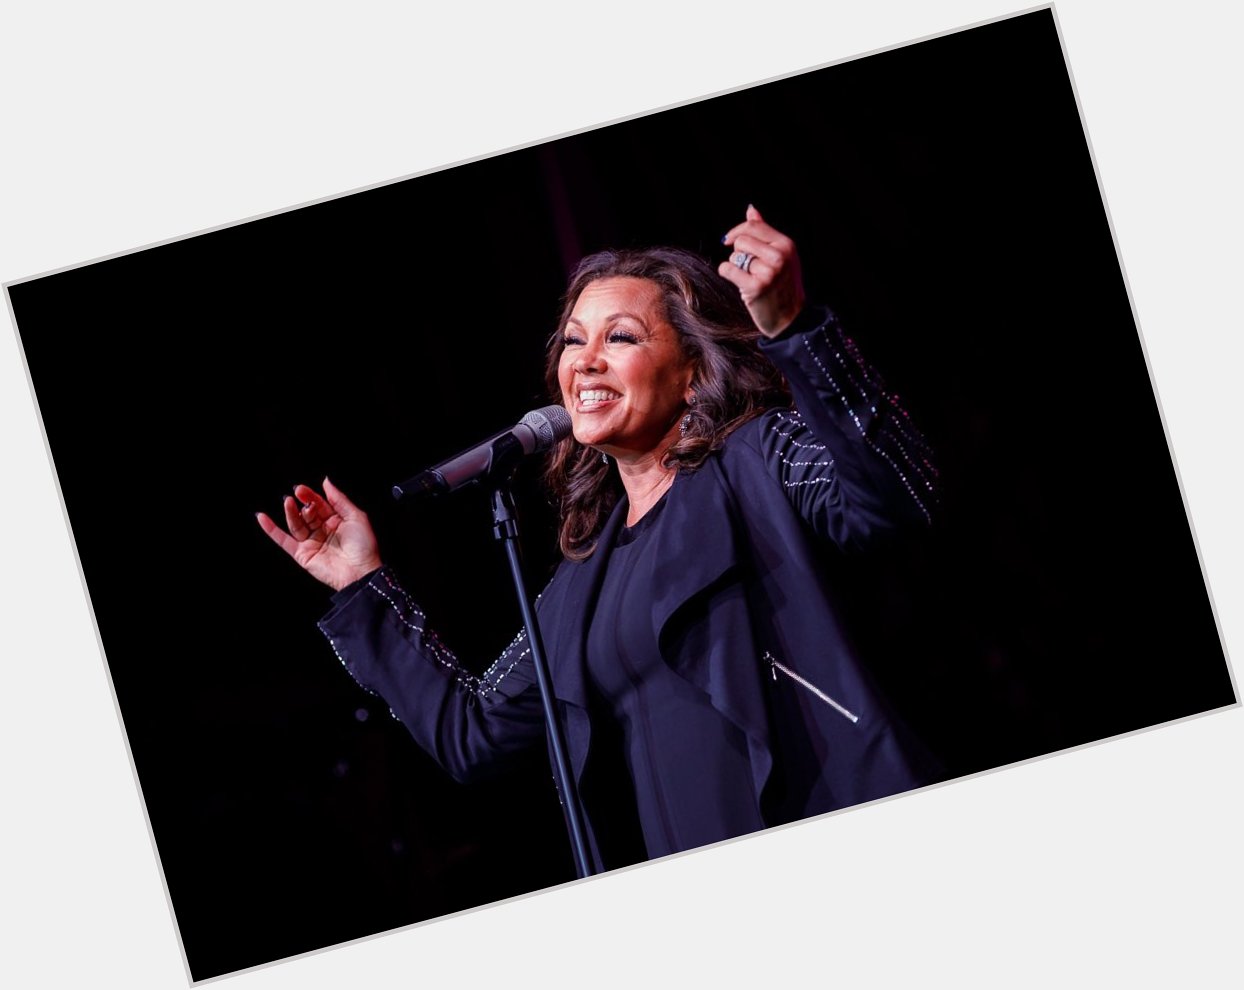 Wishing Vanessa Williams a very happy birthday! Can t wait to see you live in a few weeks at 